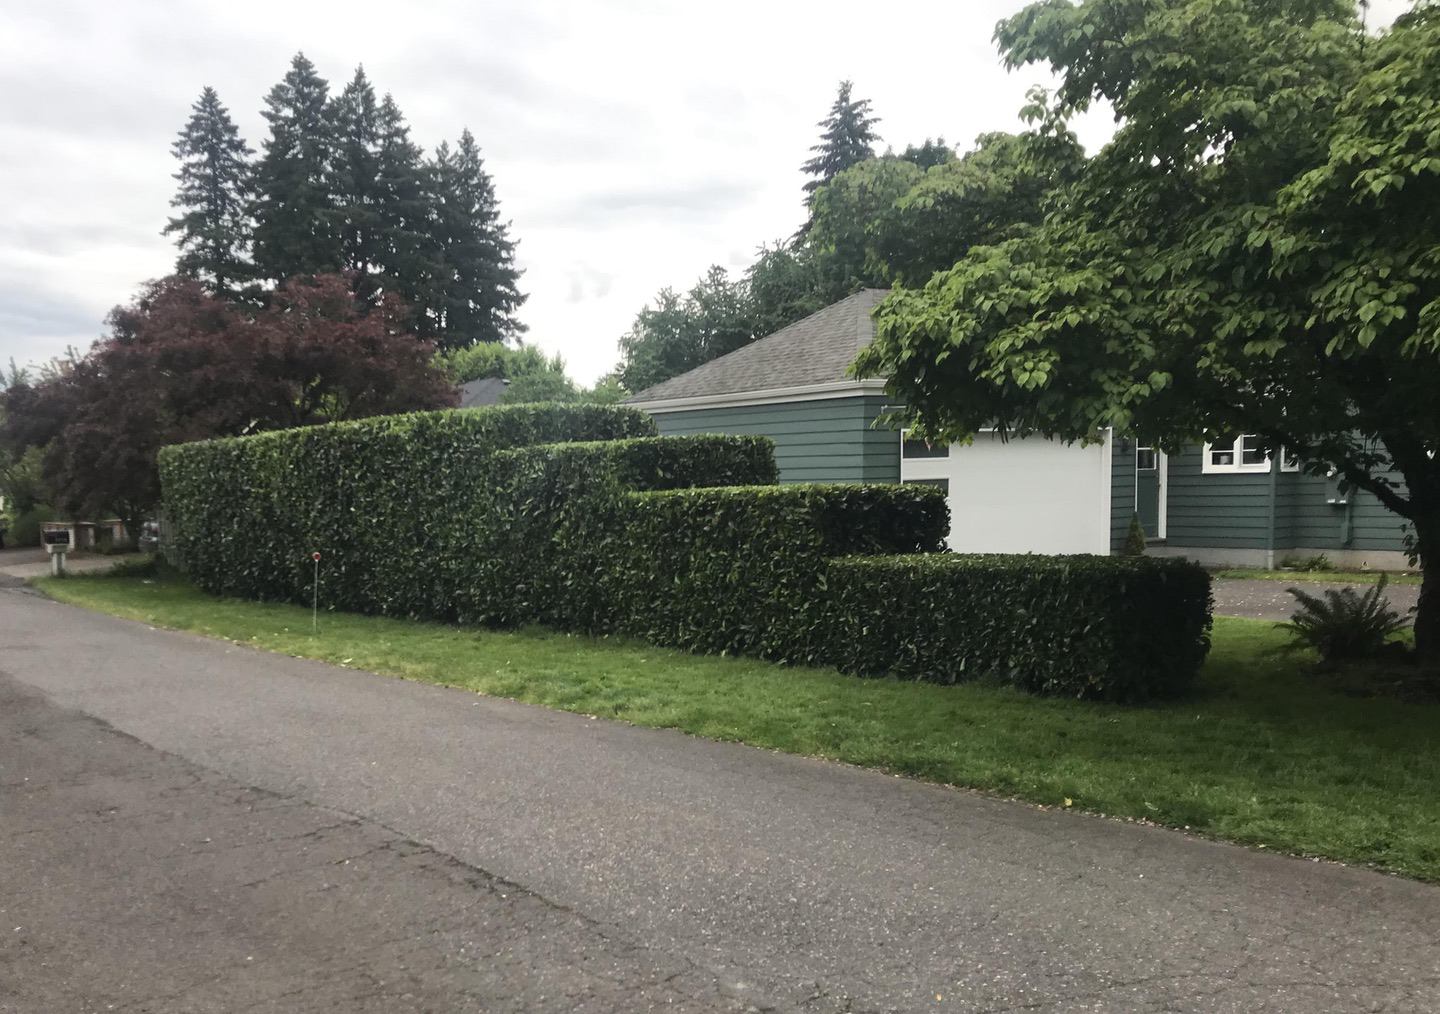 hedge trimming and shrub trimming in Portland Oregon